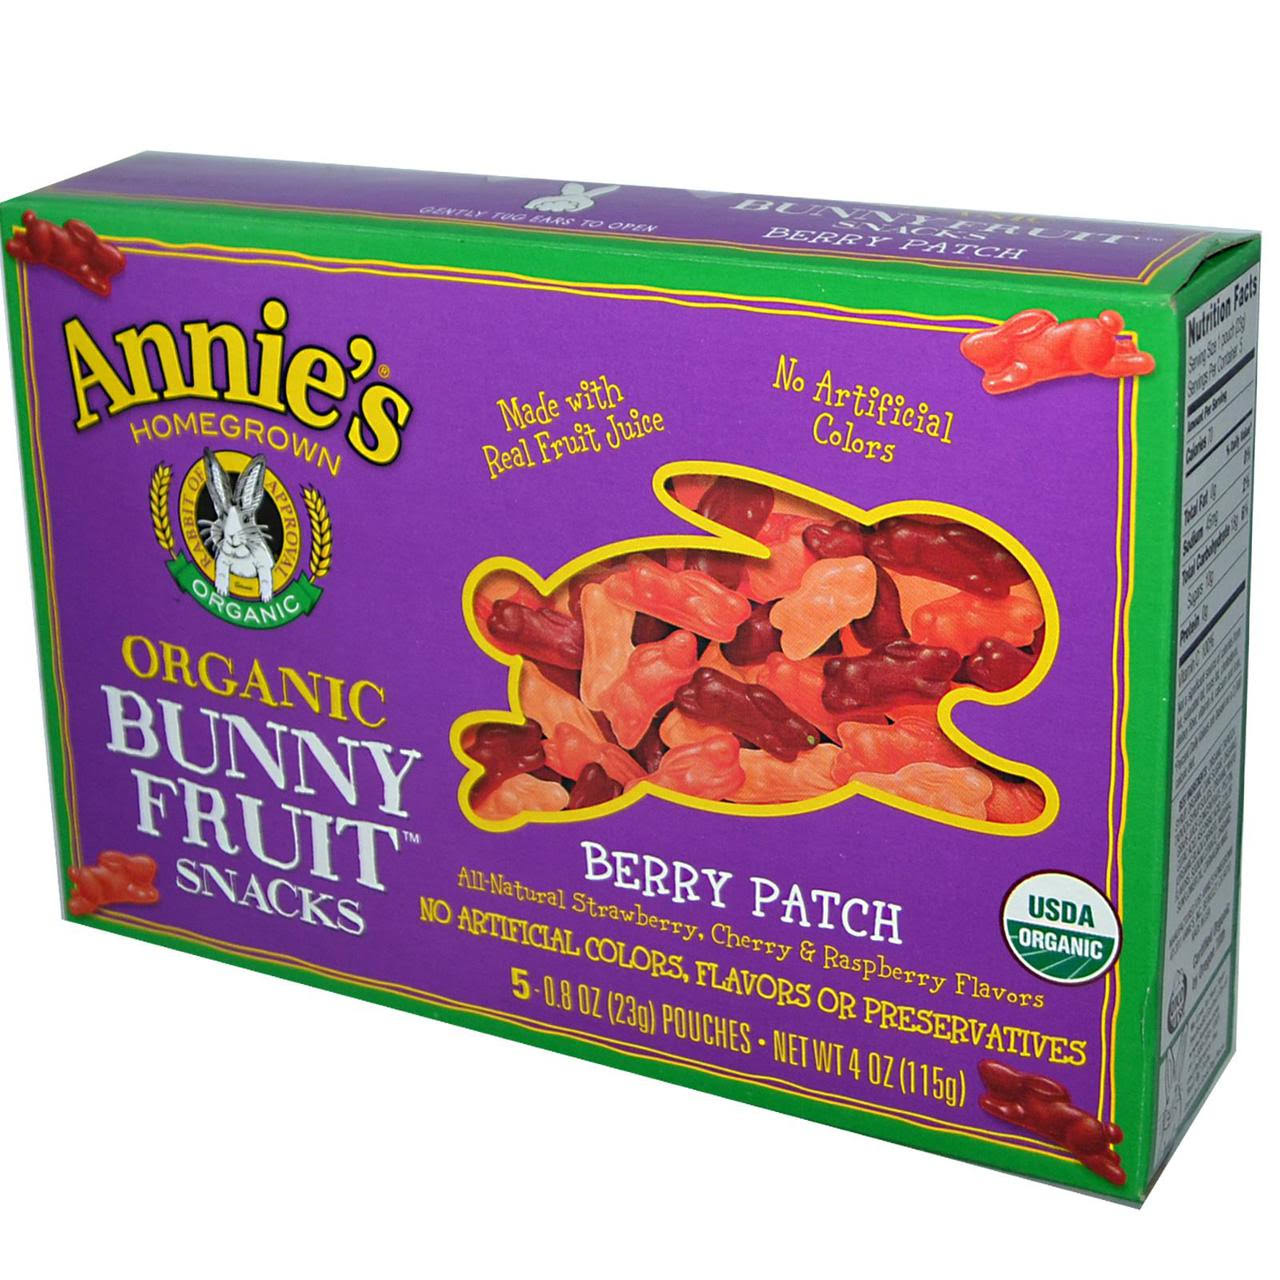 Annie's Homegrown Organic Bunny Fruit Snacks - 5ct, Berry Patch